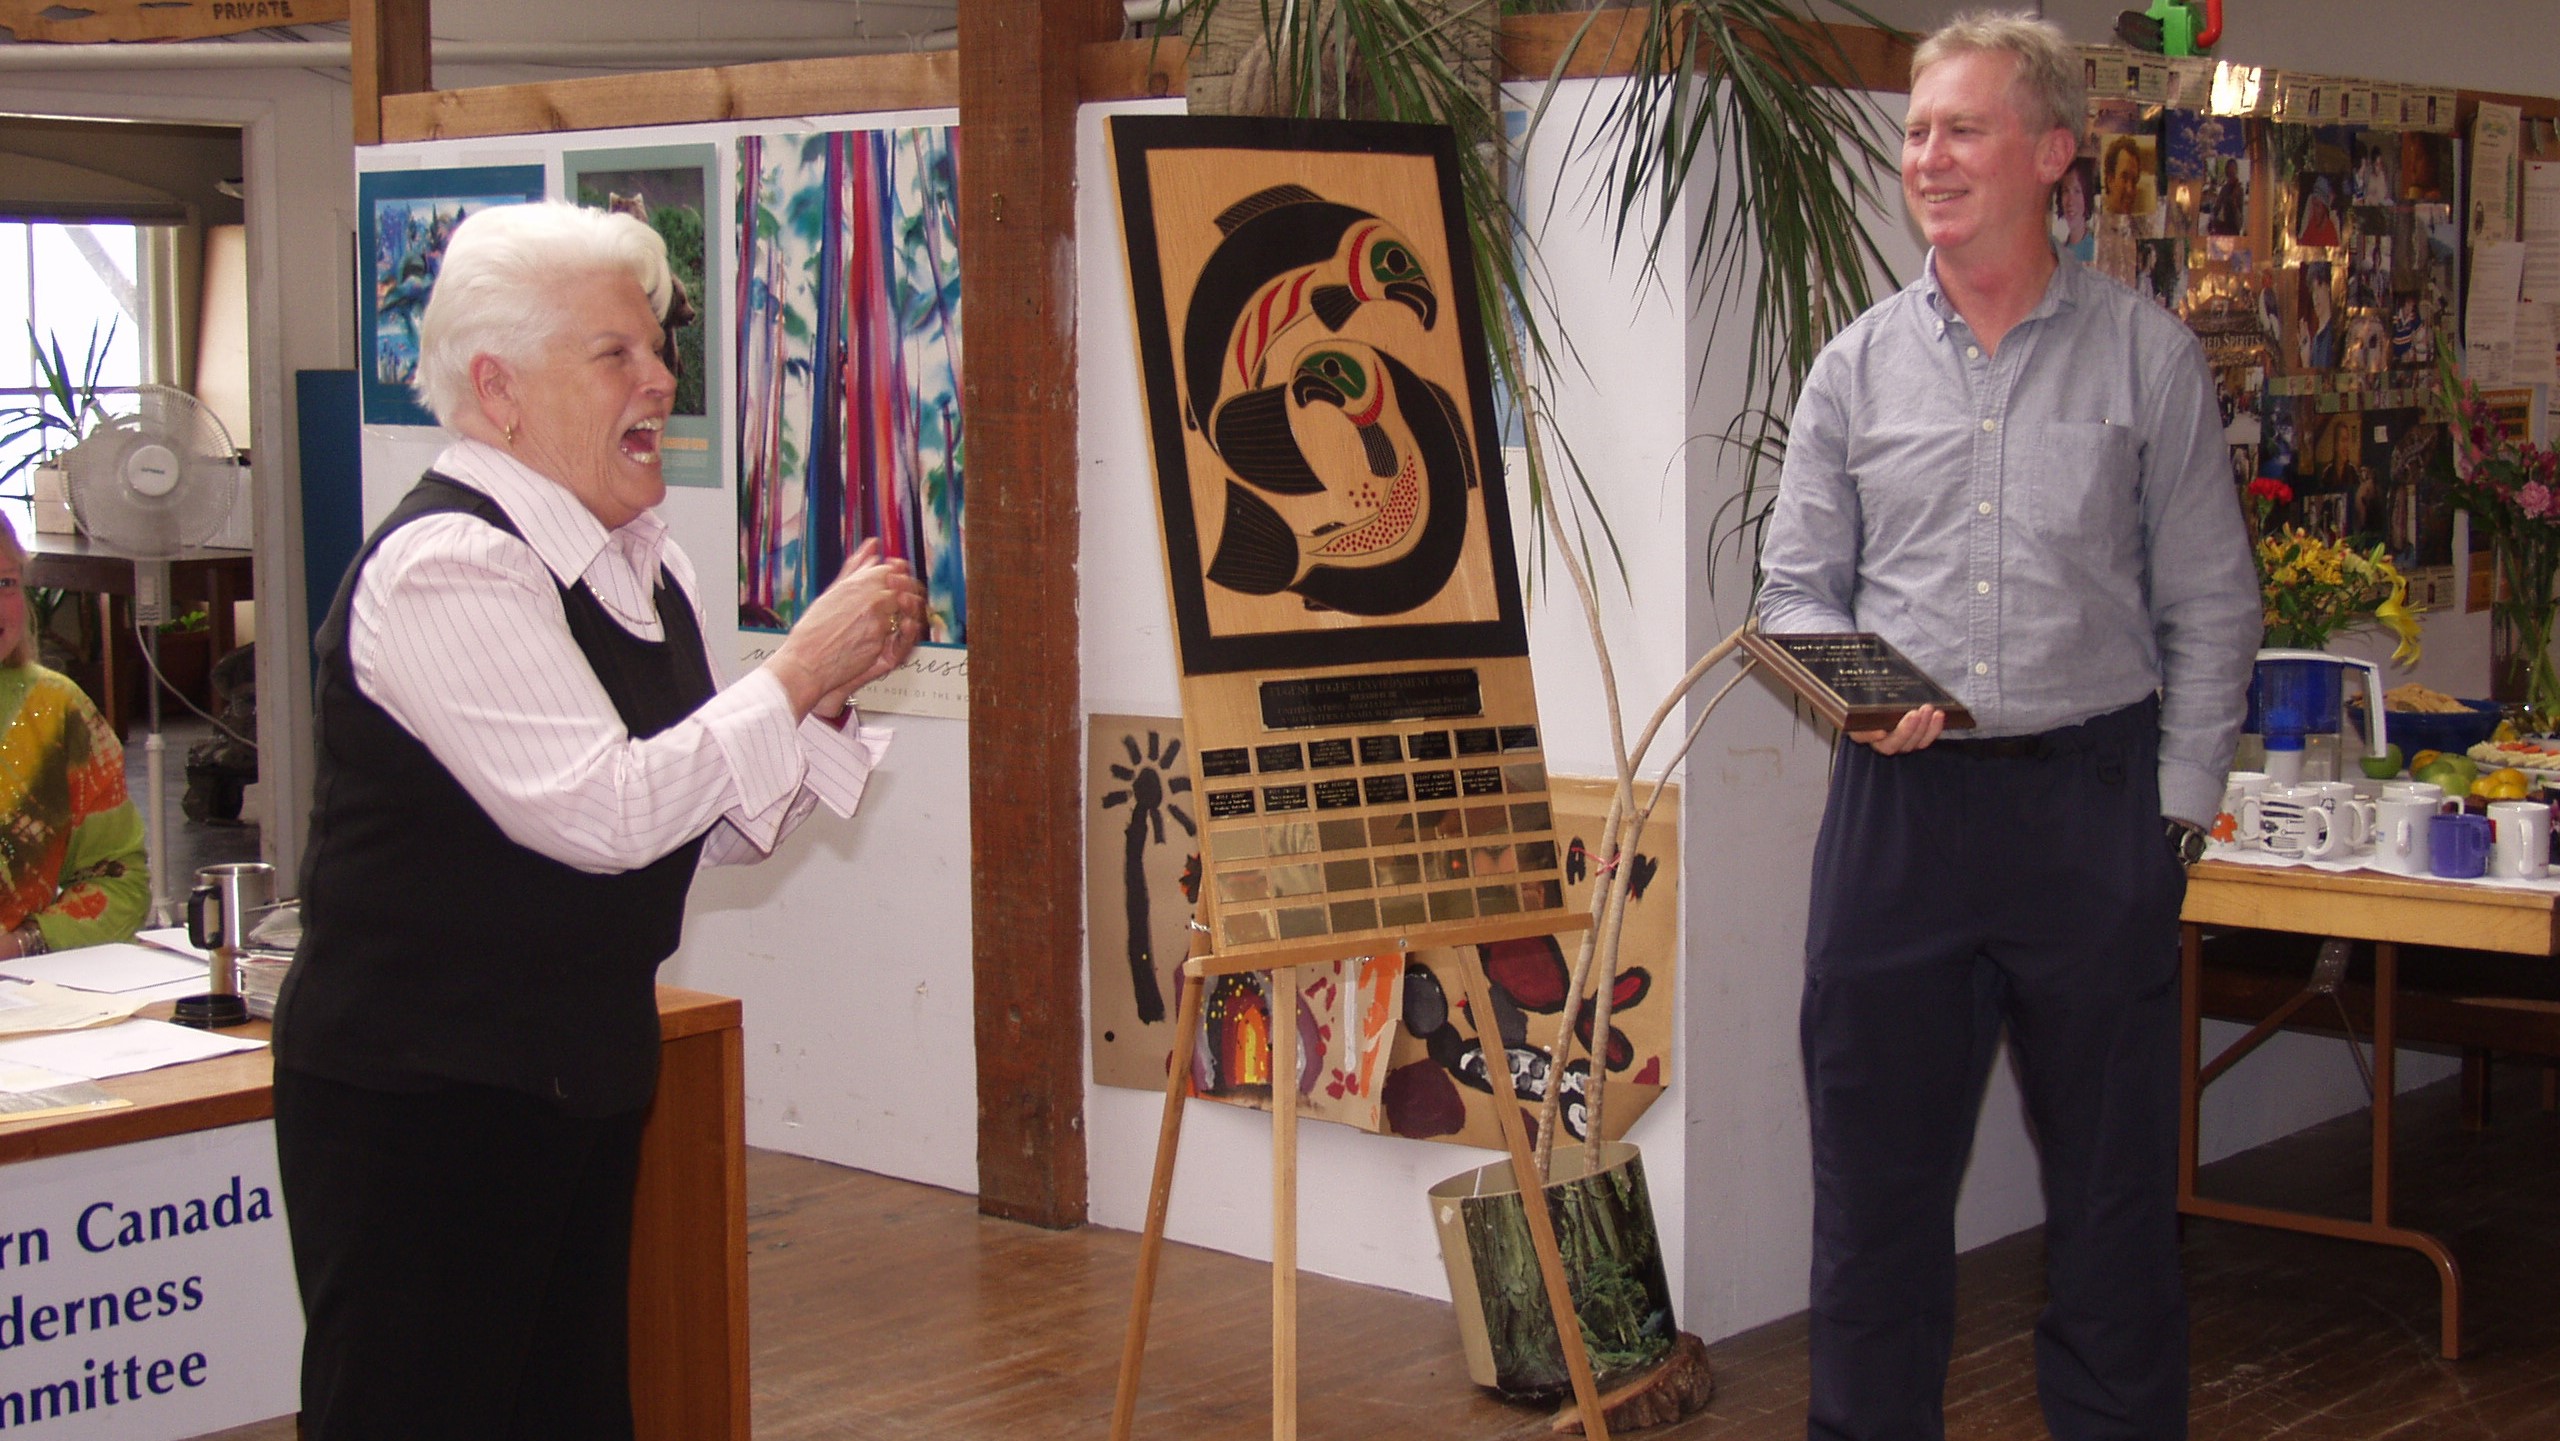 Betty Krawczyk (left) receiving the Eugene Rogers Award plaque from Joe Foy (right).